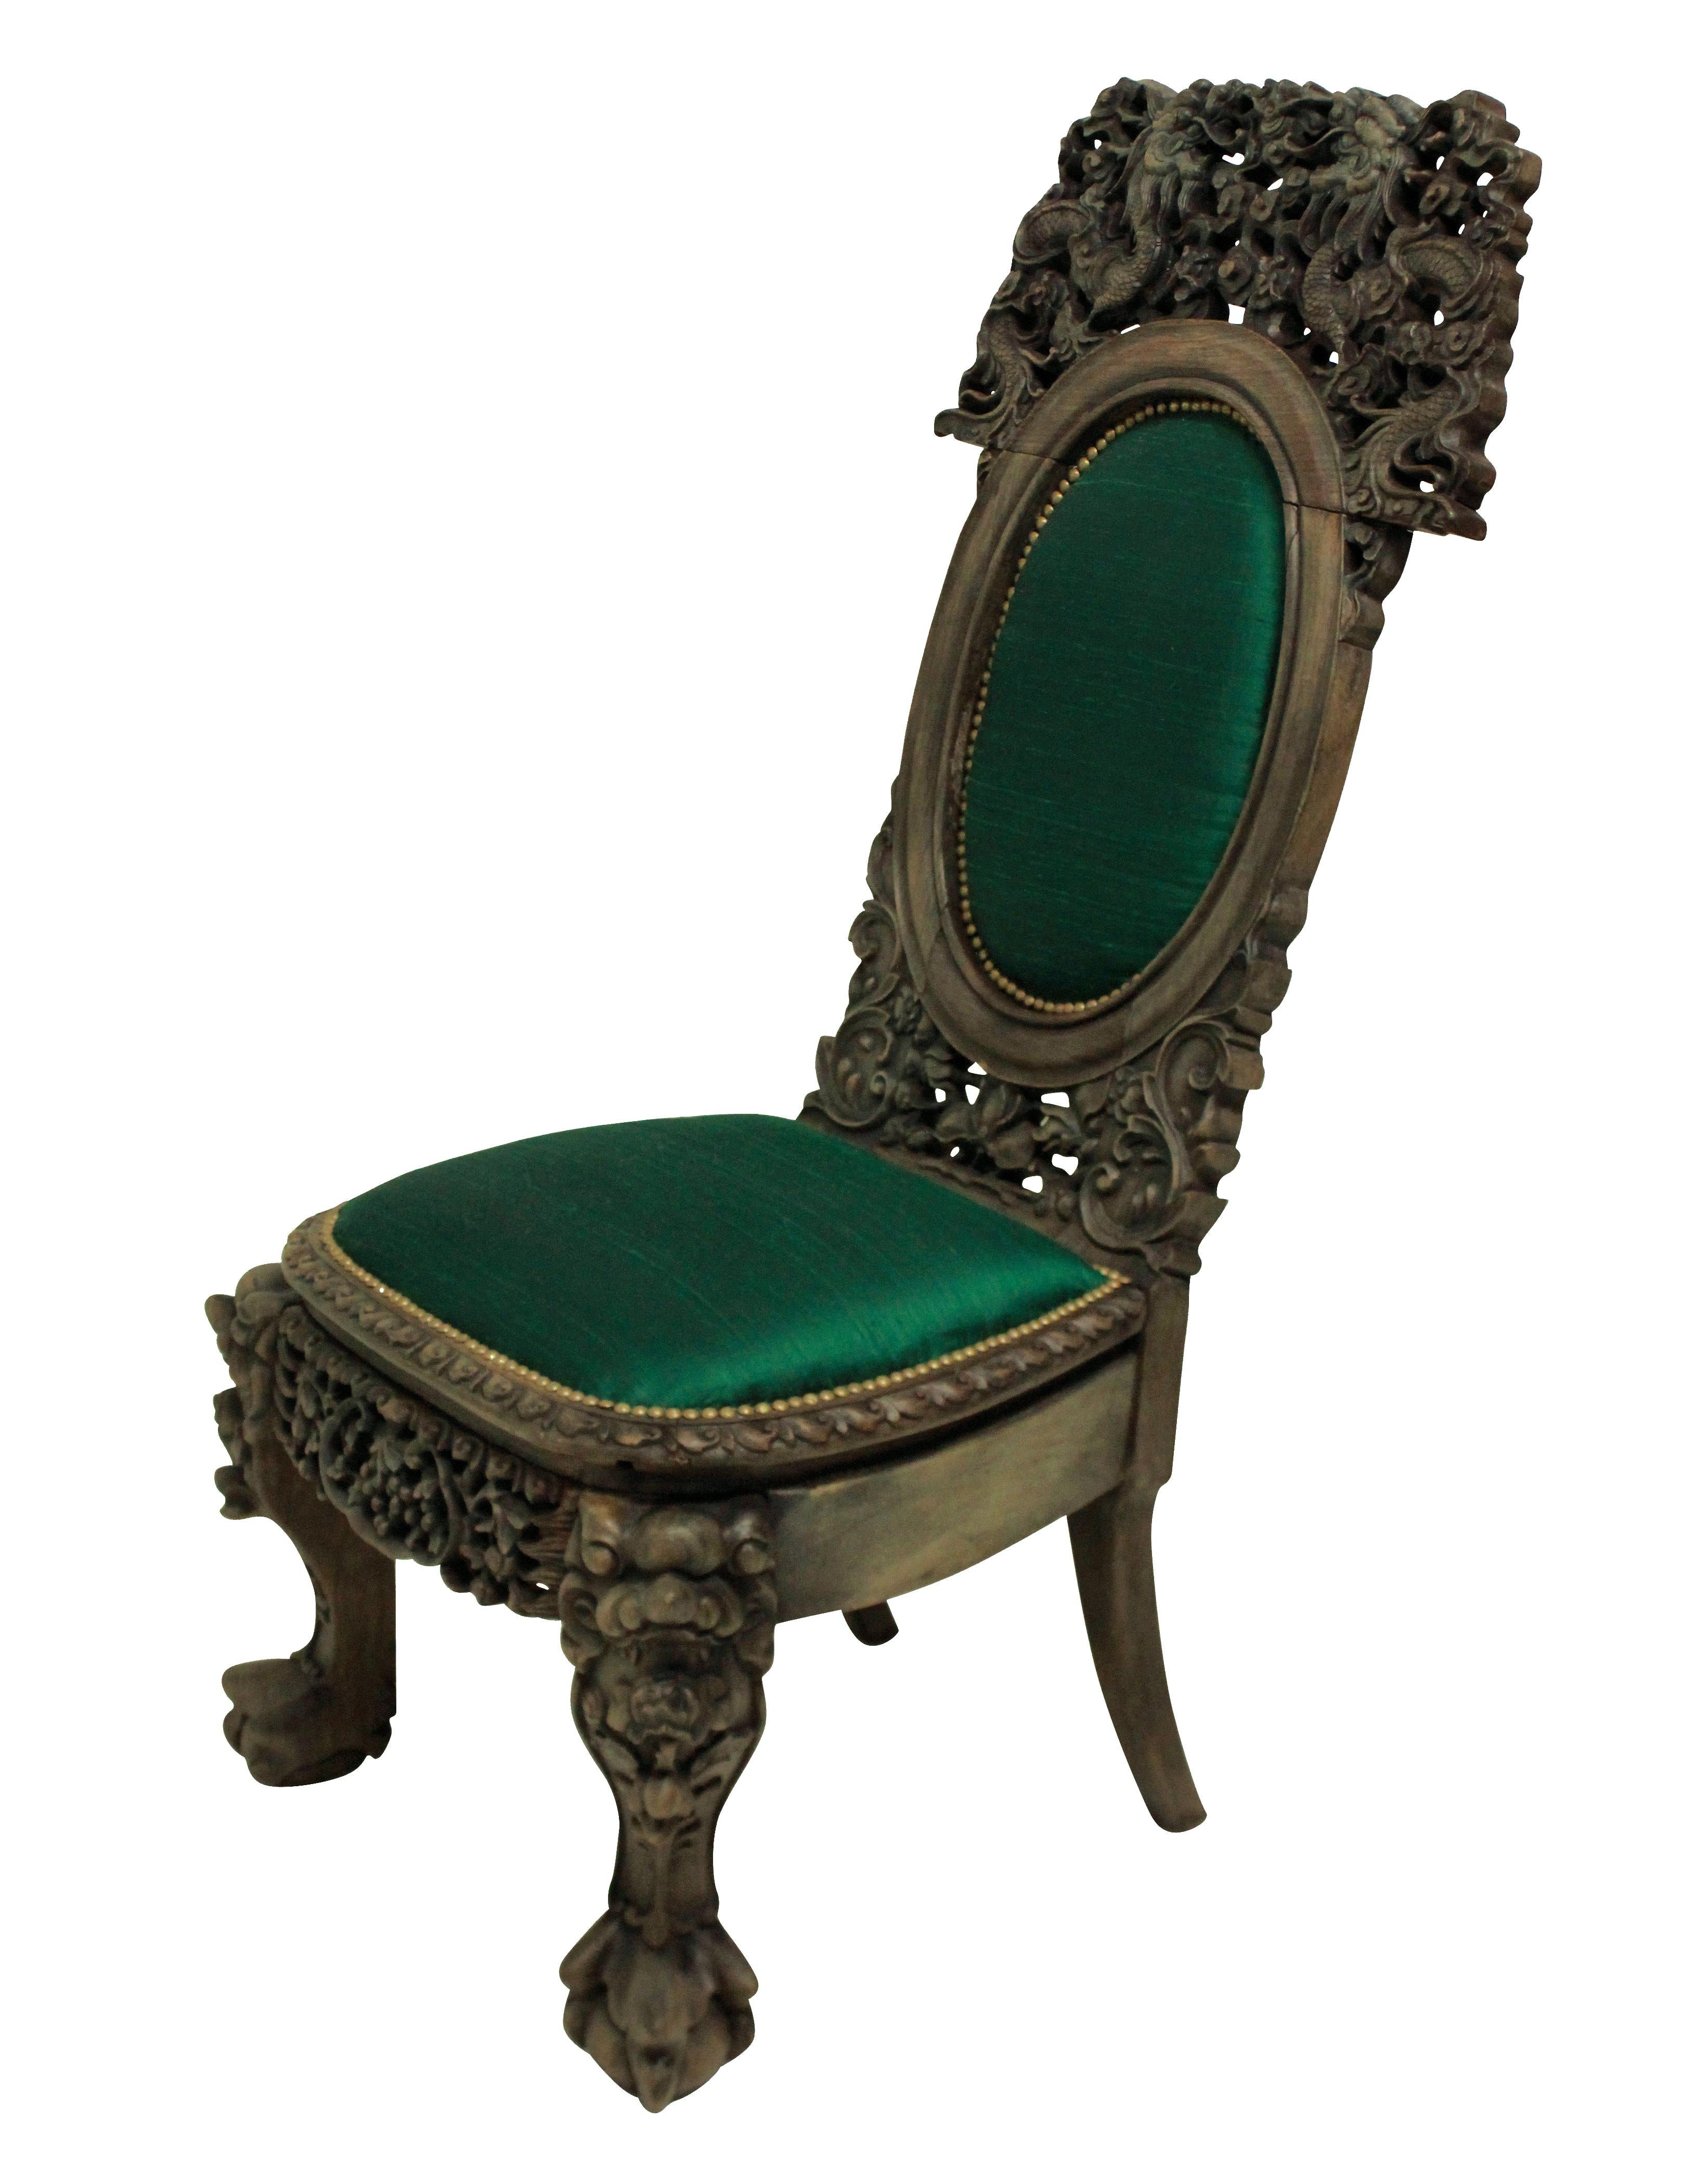 Late 19th Century 19th Century Bleached Hardwood Chinese Chair in Emerald Silk